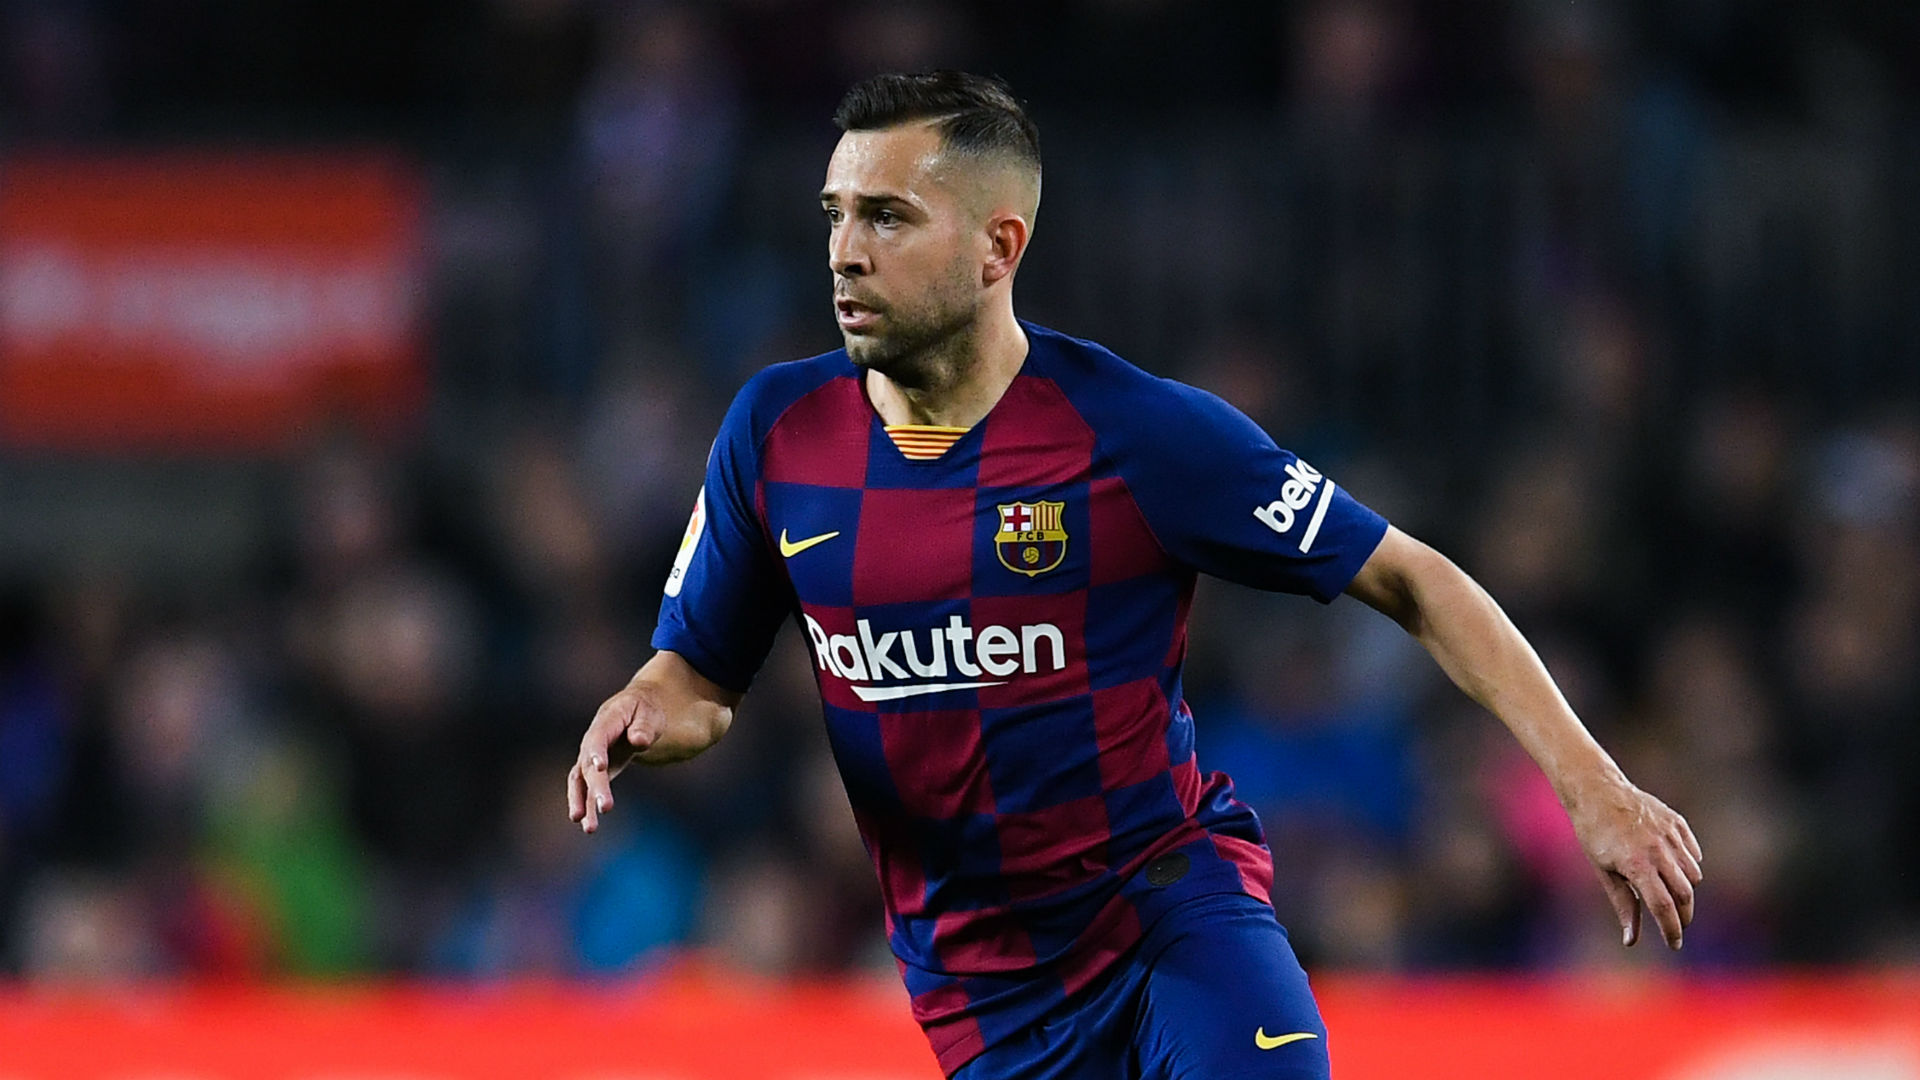 Former Barcelona Defender Alba to Reunite with Messi and Busquets at Inter Miami